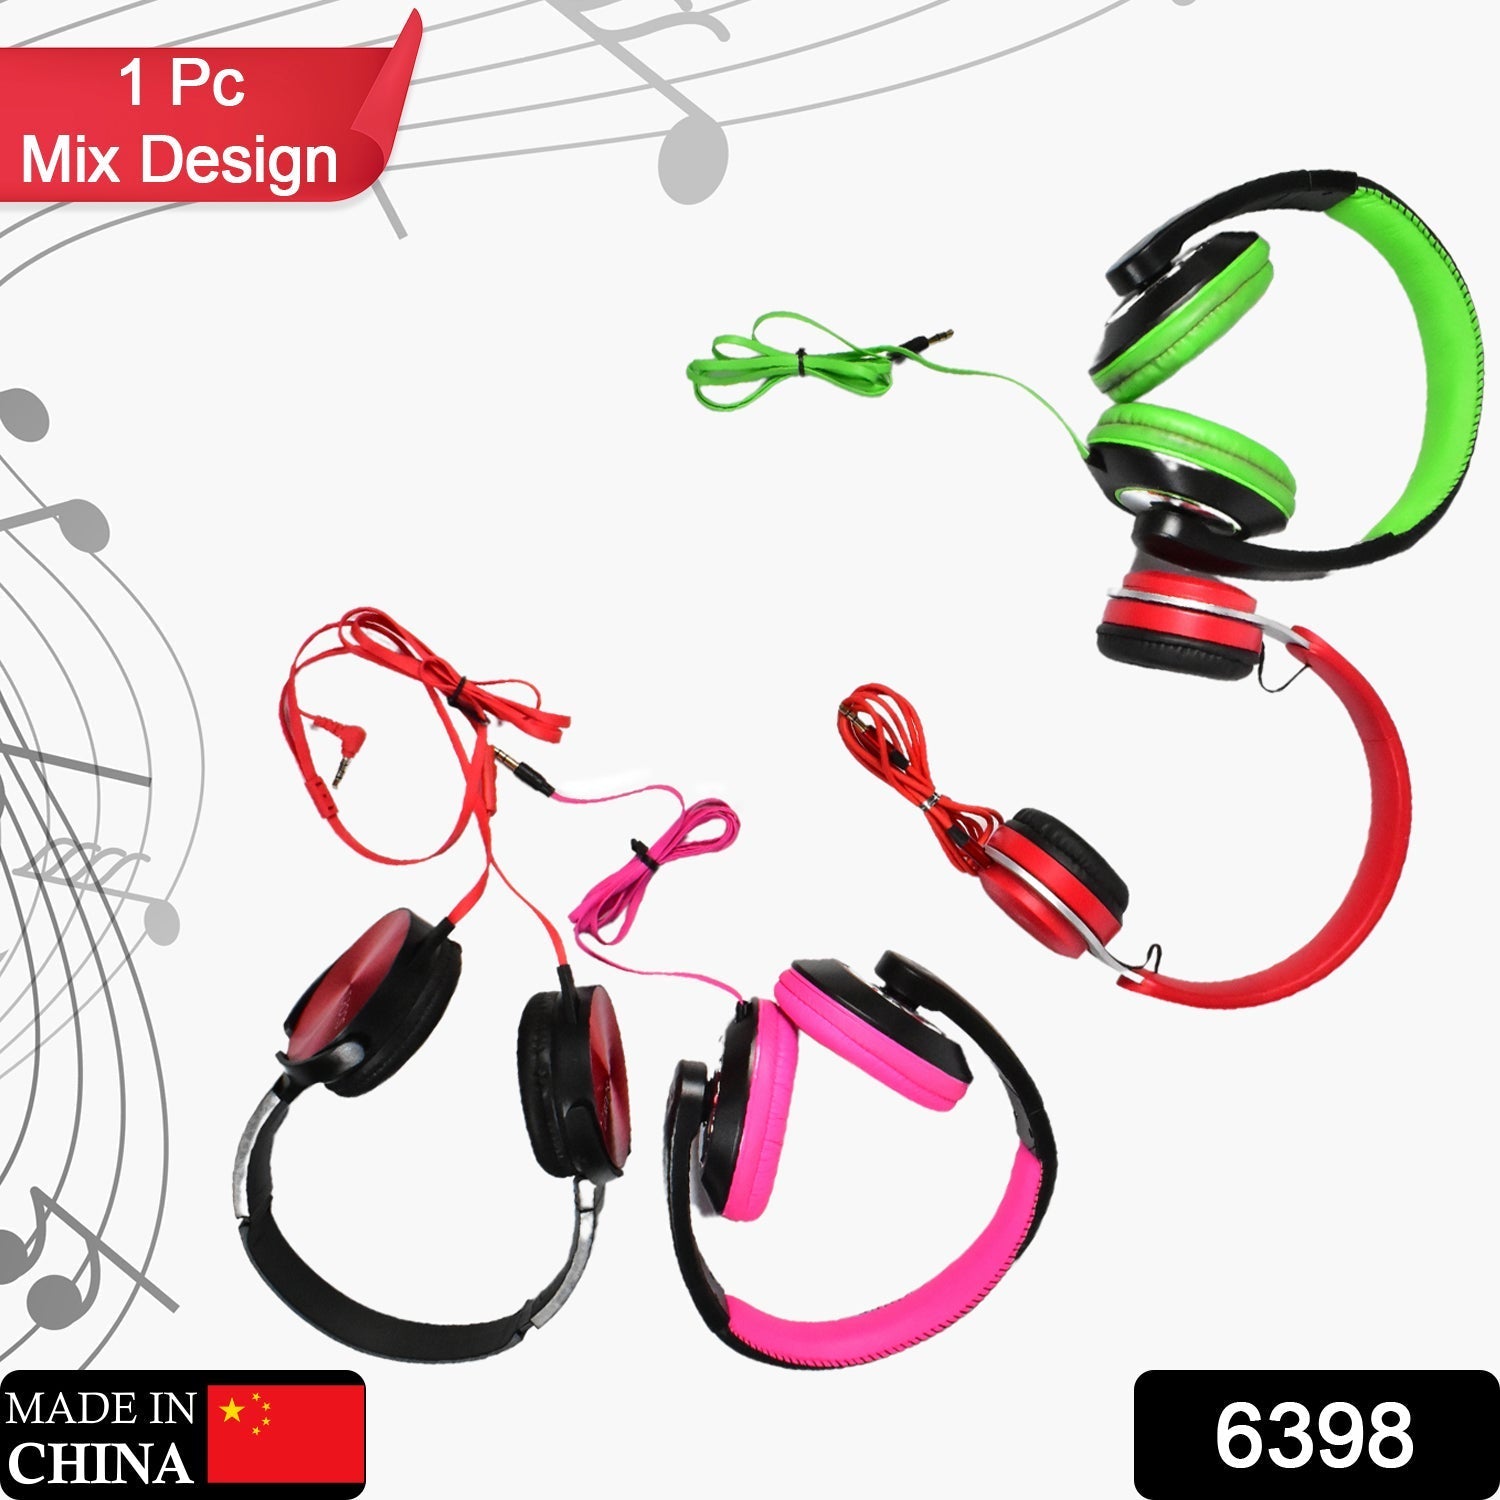 6398 WIRED HEADPHONES WITH MIC ON-EAR HEADPHONES WITH TANGLE FREE CABLE FOR ALL SMART PHONE SUPPORT HEAD PHONE (Mix Design 1 Pc) Dukandaily